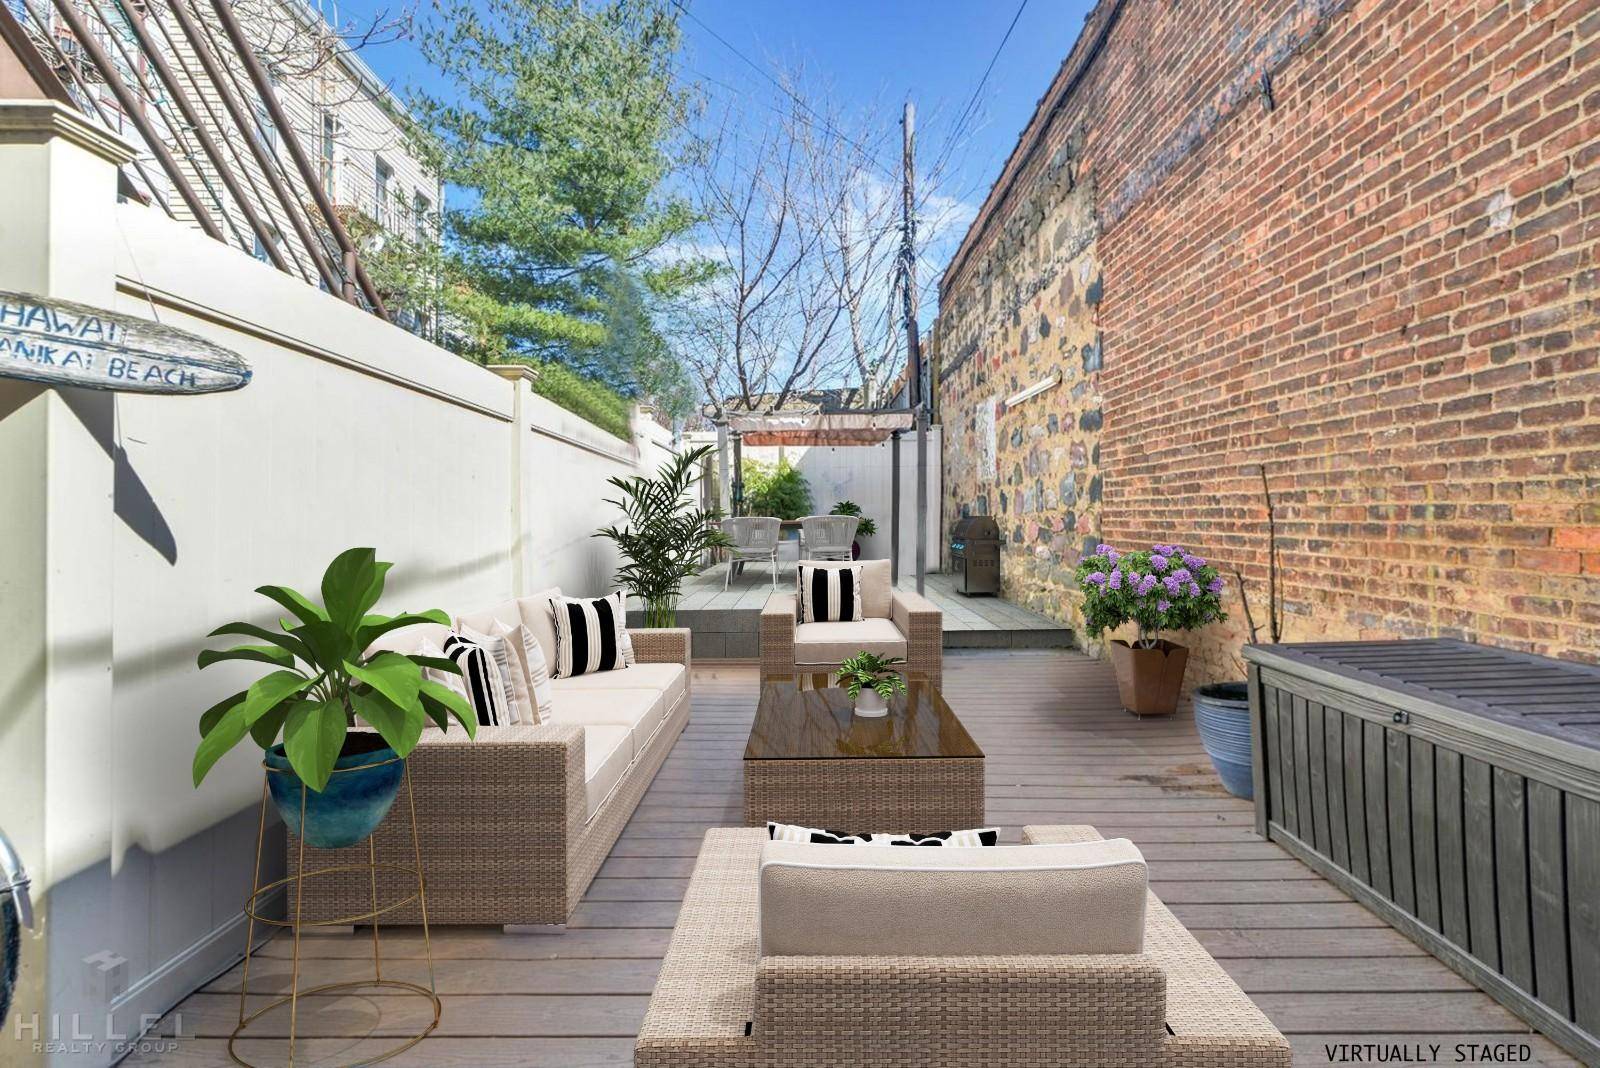 Location ? Check. Private outdoor space ?